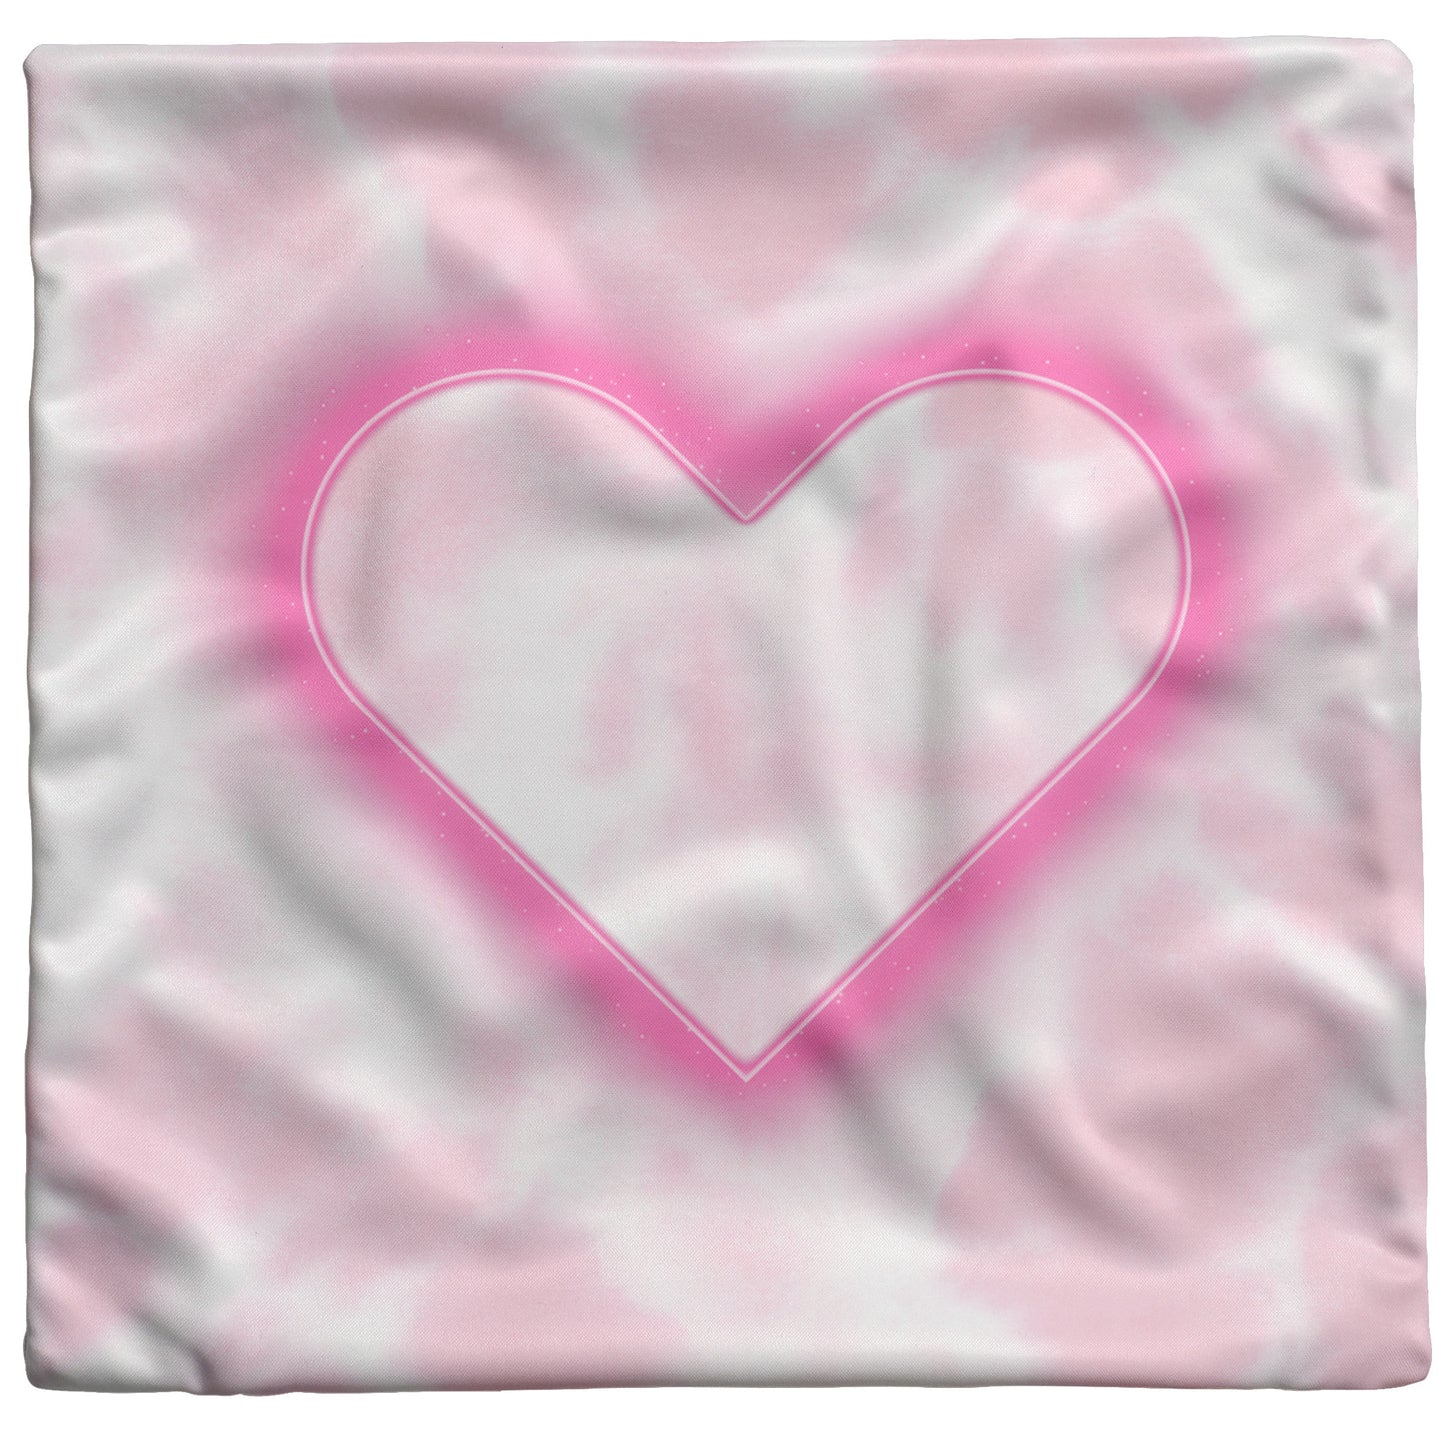 Pink Glowing Love Heart Pillow Cover 26" Square